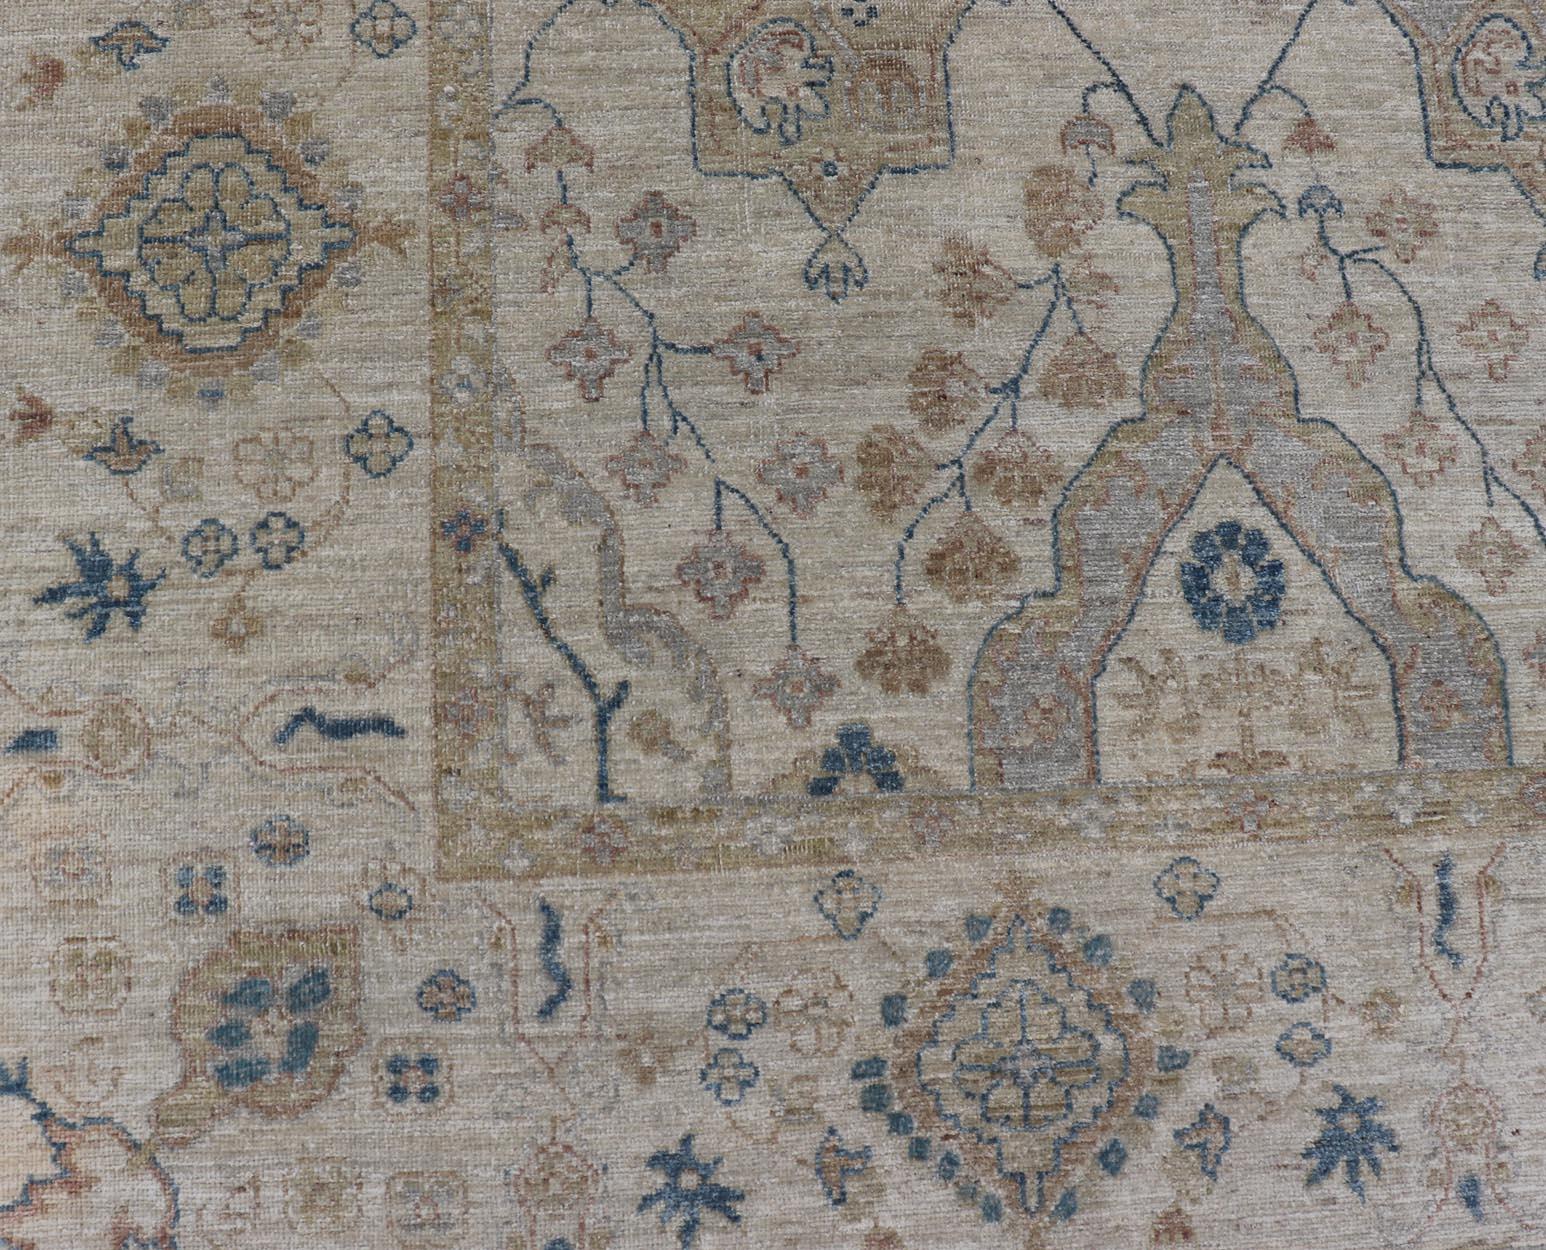 Wool  Afghan Khotan Rug with All-Over Geometric Pattern in Tan, Taupe, and Light Blue For Sale